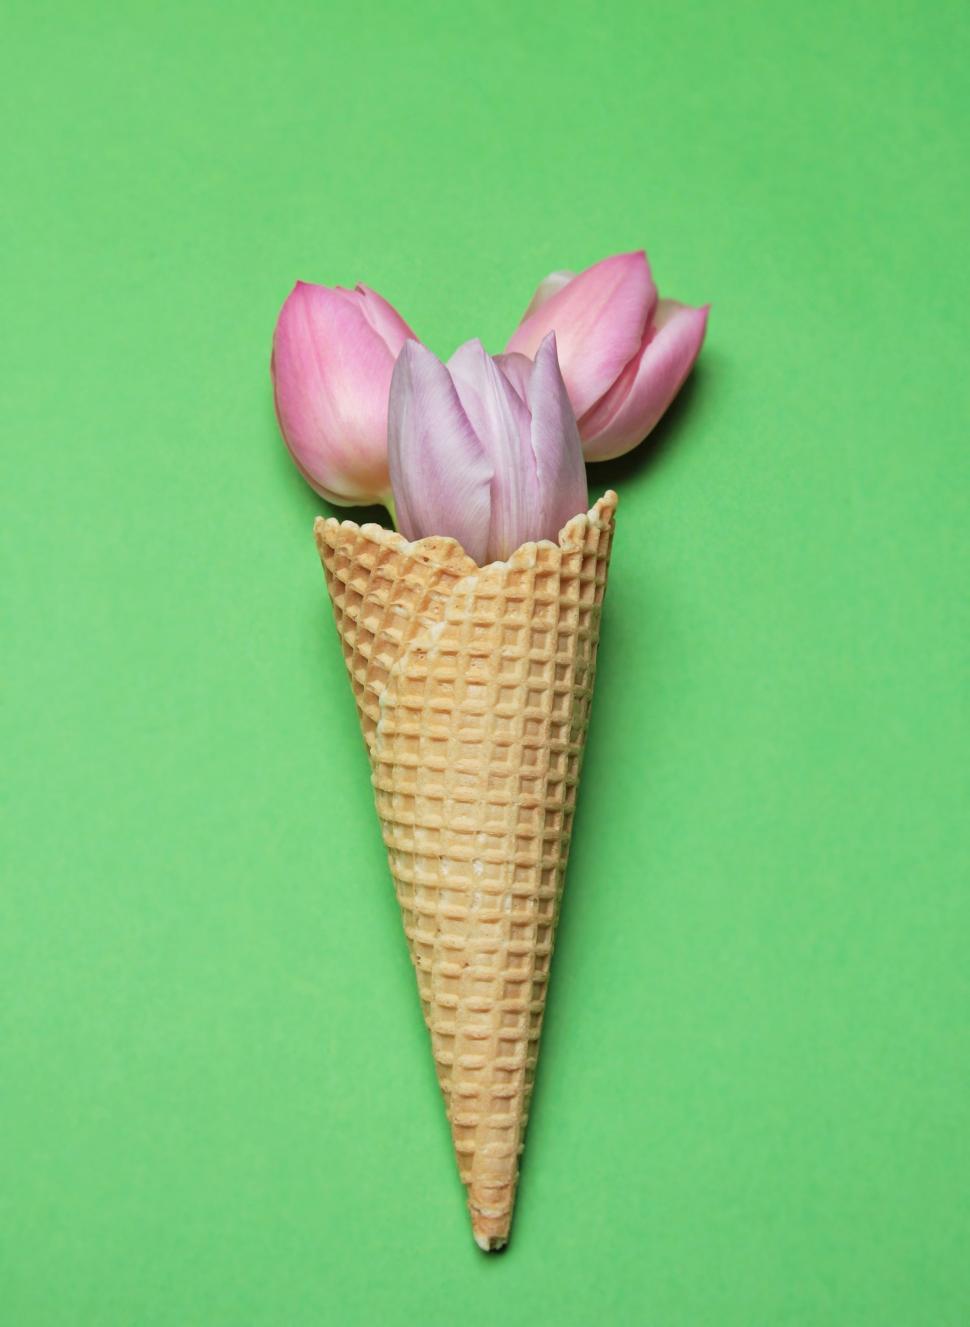 Free Image of Waffle cone and flowers 